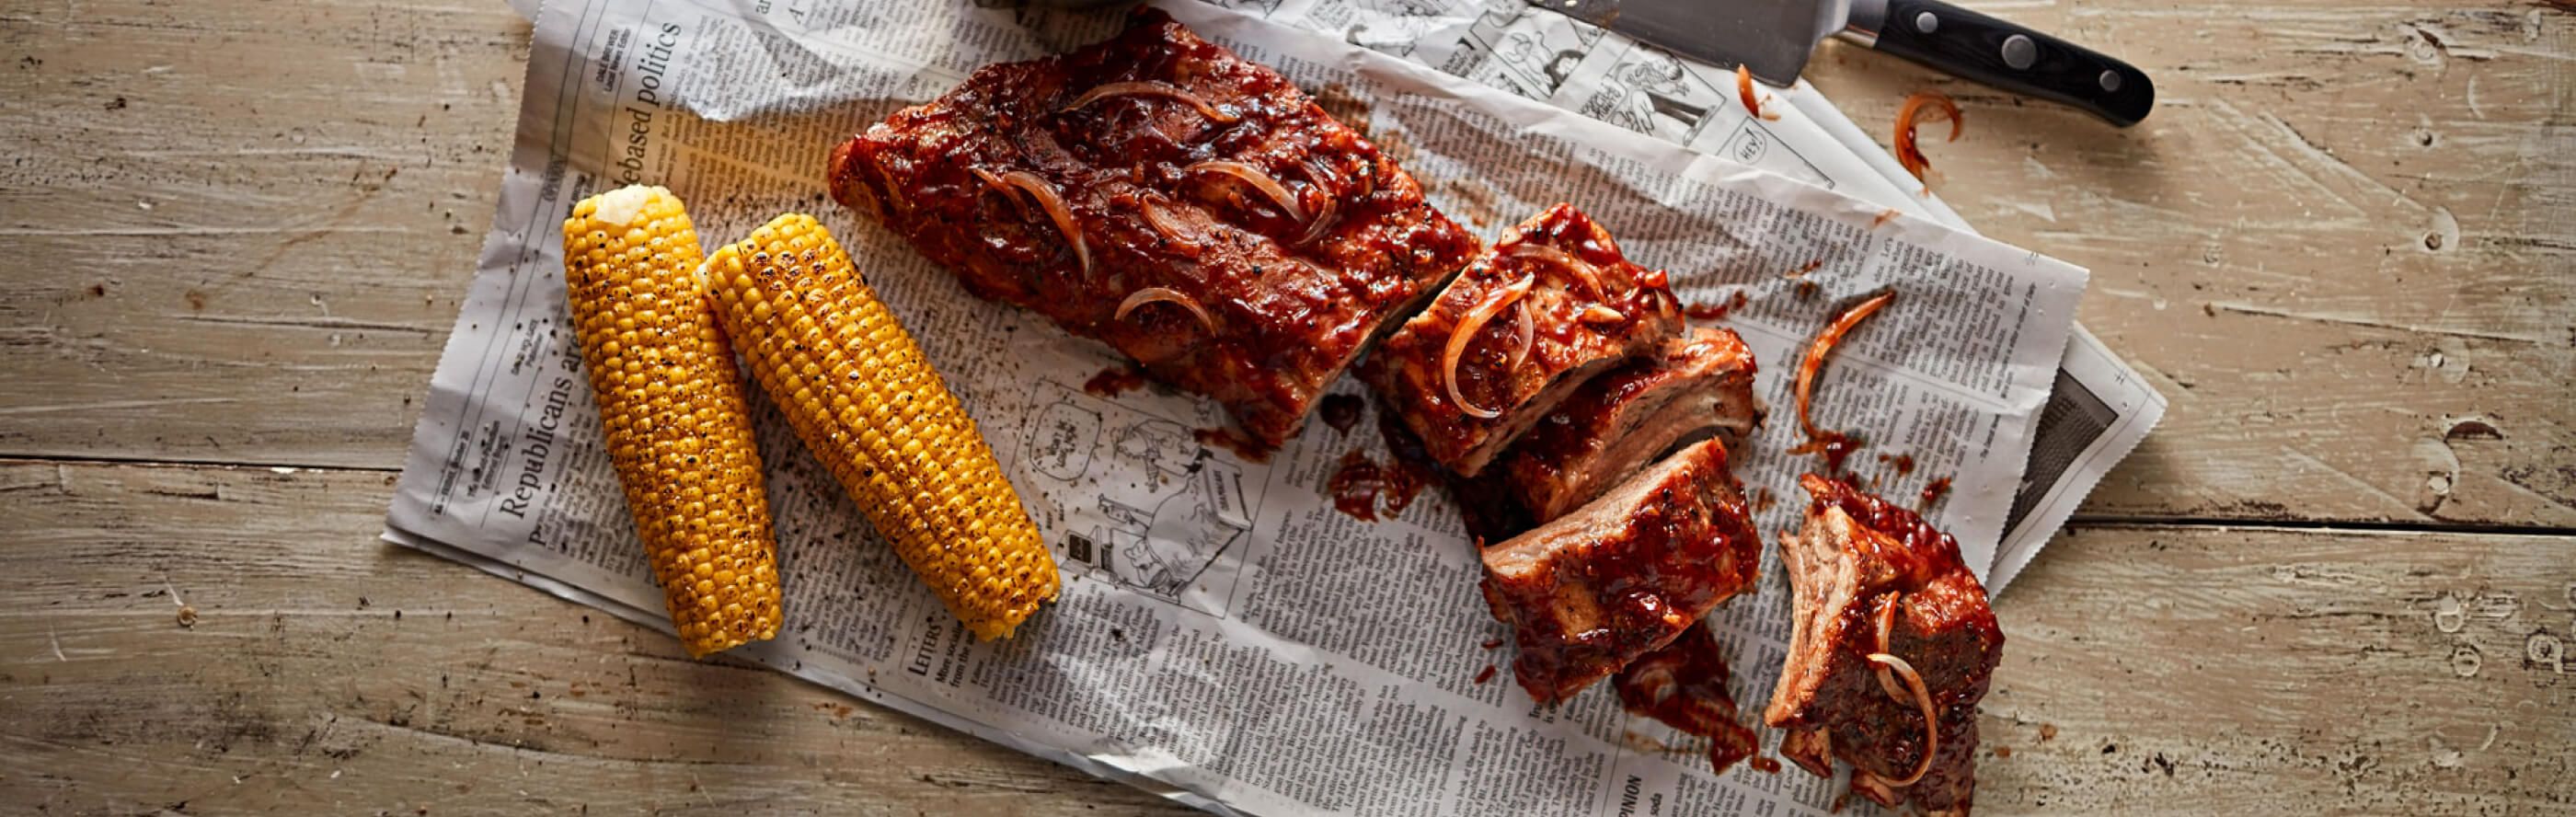 Large rack of ribs next to corn.